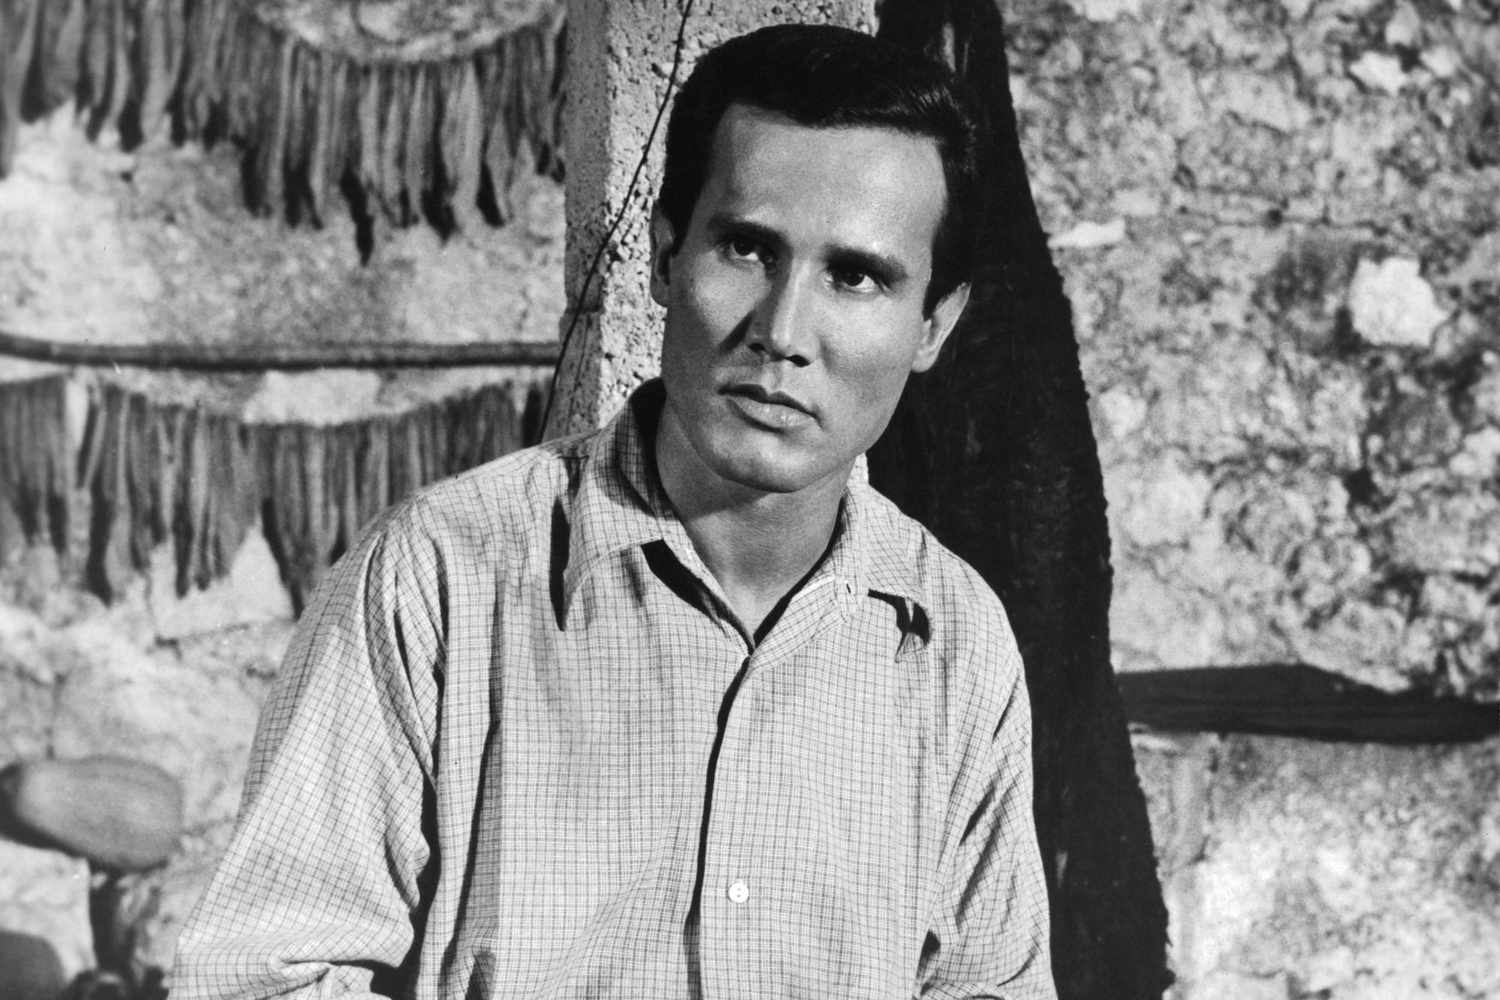 Actor Henry Silva on set of the movie "The Secret Invasion" in 1964. (Photo by Michael Ochs Archives/Getty Images)